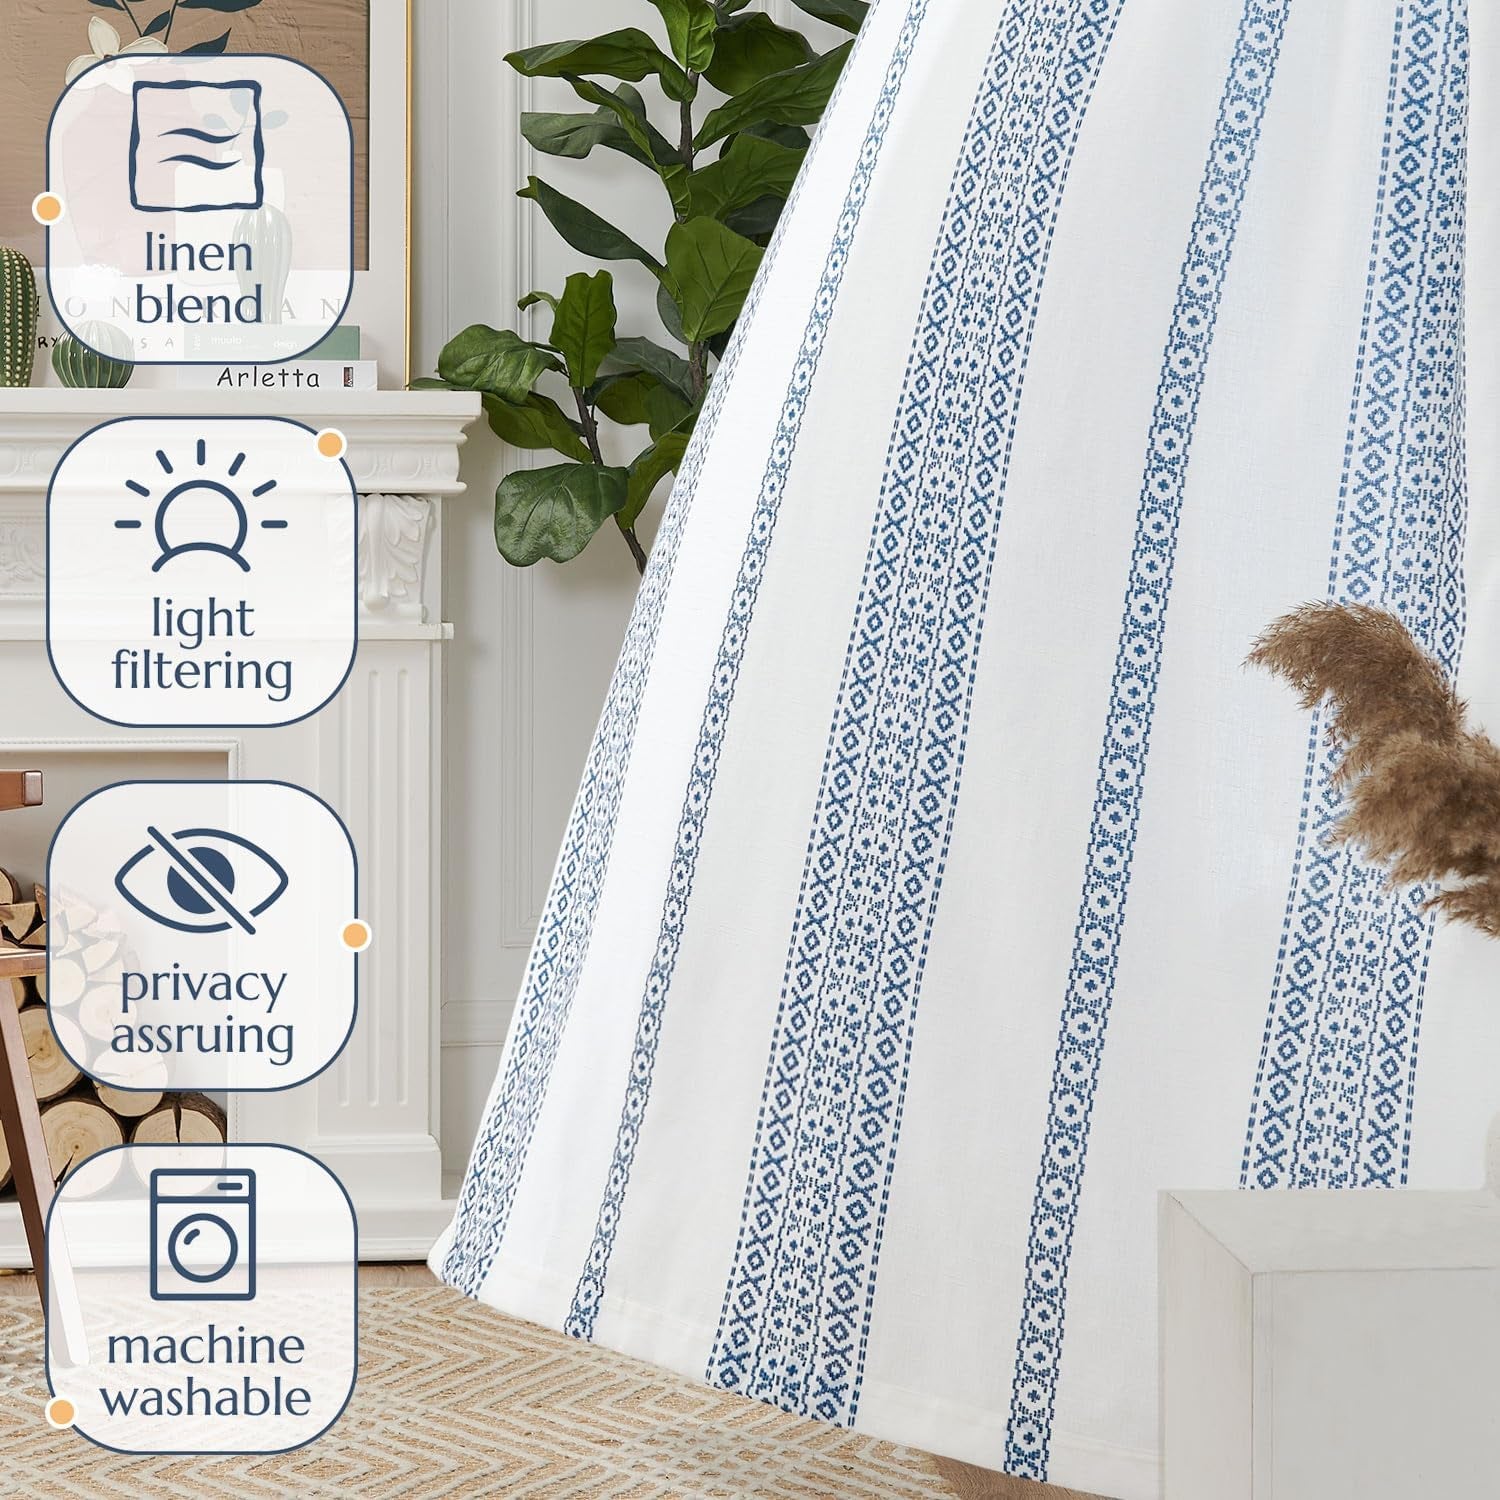 Jinchan Boho Linen Curtains 84 Inches Long Country Farmhouse Printed Living Room Bedroom Curtains Dark Blue on White Window Curtains Rod Pocket Back Tab Geometric Light Filtering Curtain Set 2 Panels  CKNY HOME FASHION   